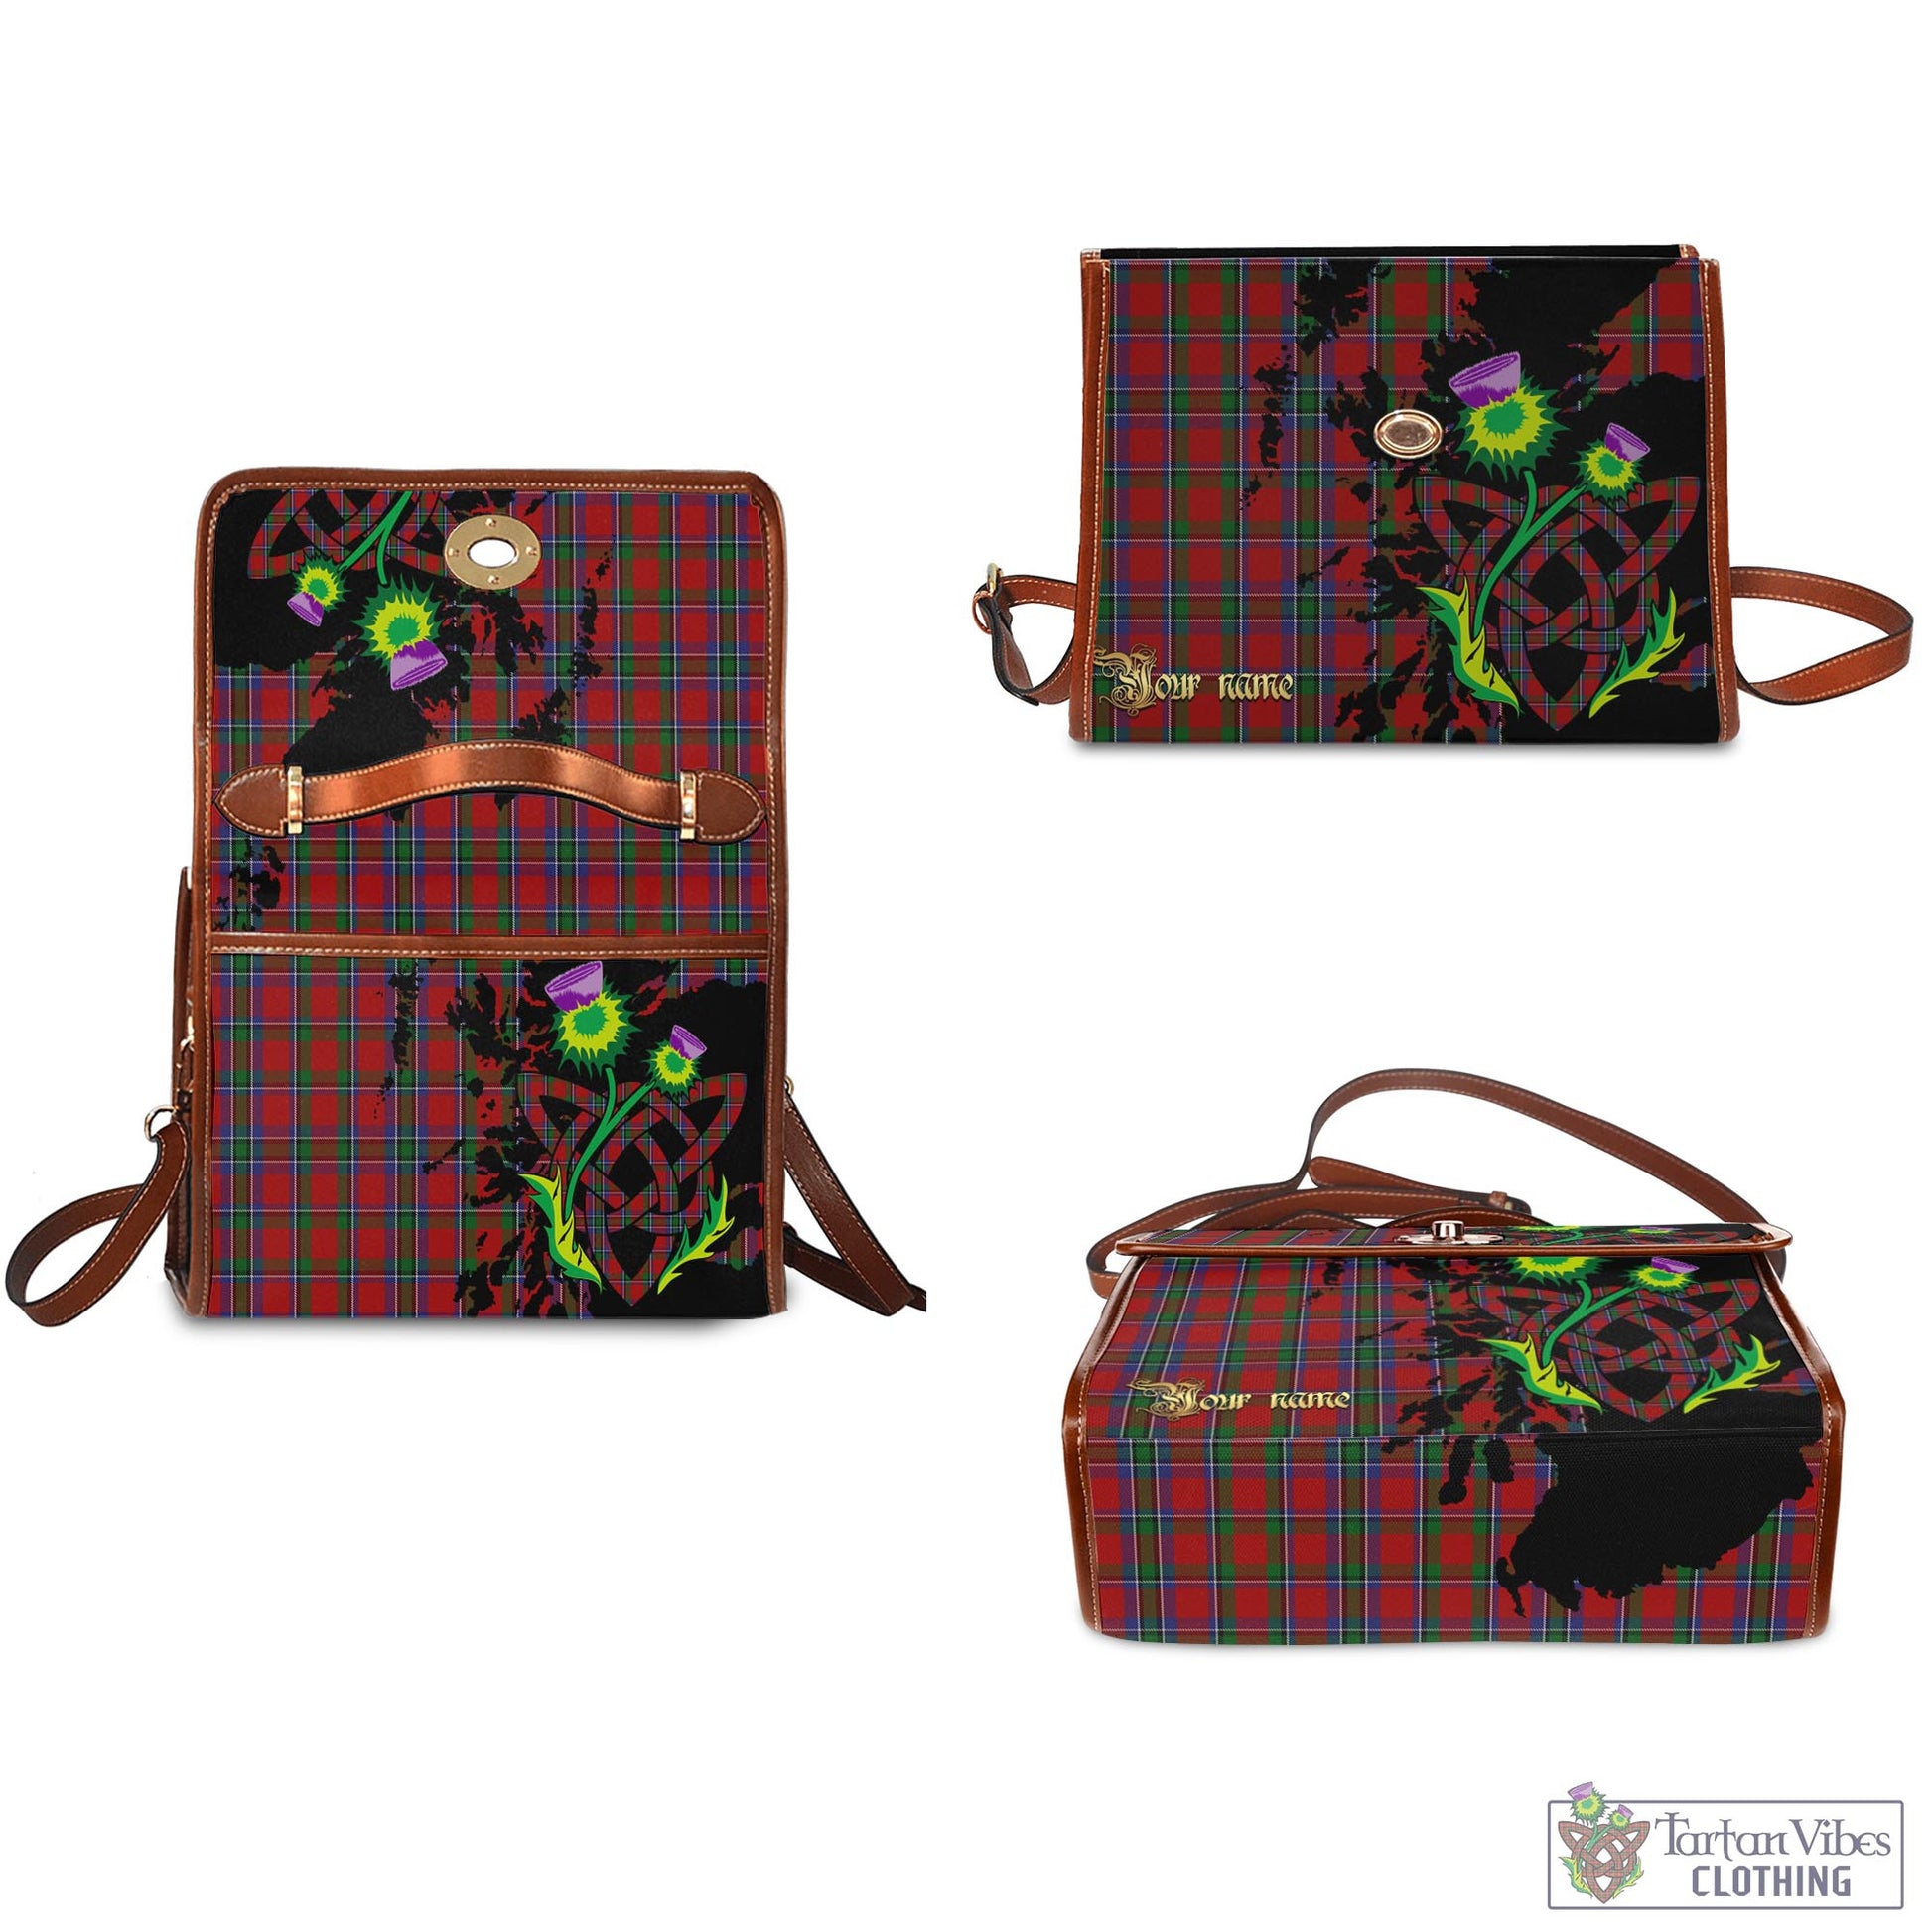 Tartan Vibes Clothing Sinclair Tartan Waterproof Canvas Bag with Scotland Map and Thistle Celtic Accents